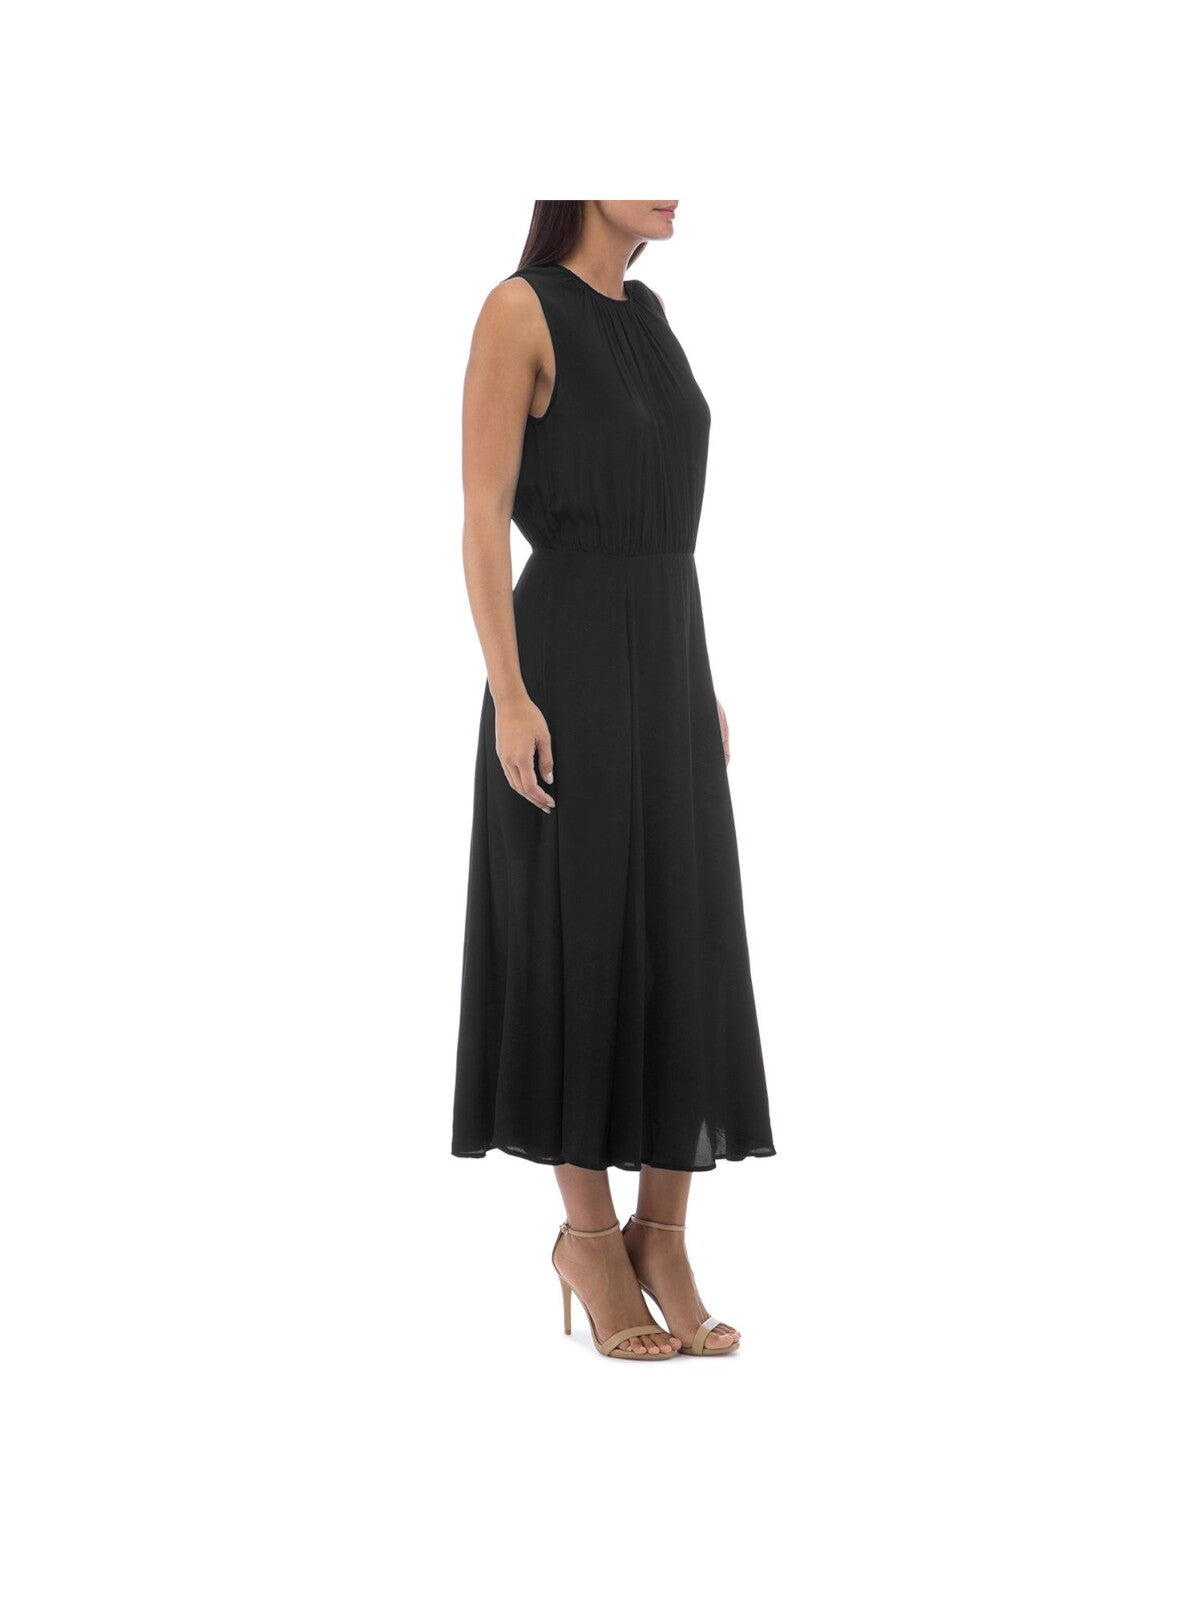 COLLECTION BY BOBEAU Womens Black Stretch Tie Zippered Sleeveless Round Neck Tea-Length Cocktail A-Line Dress XS